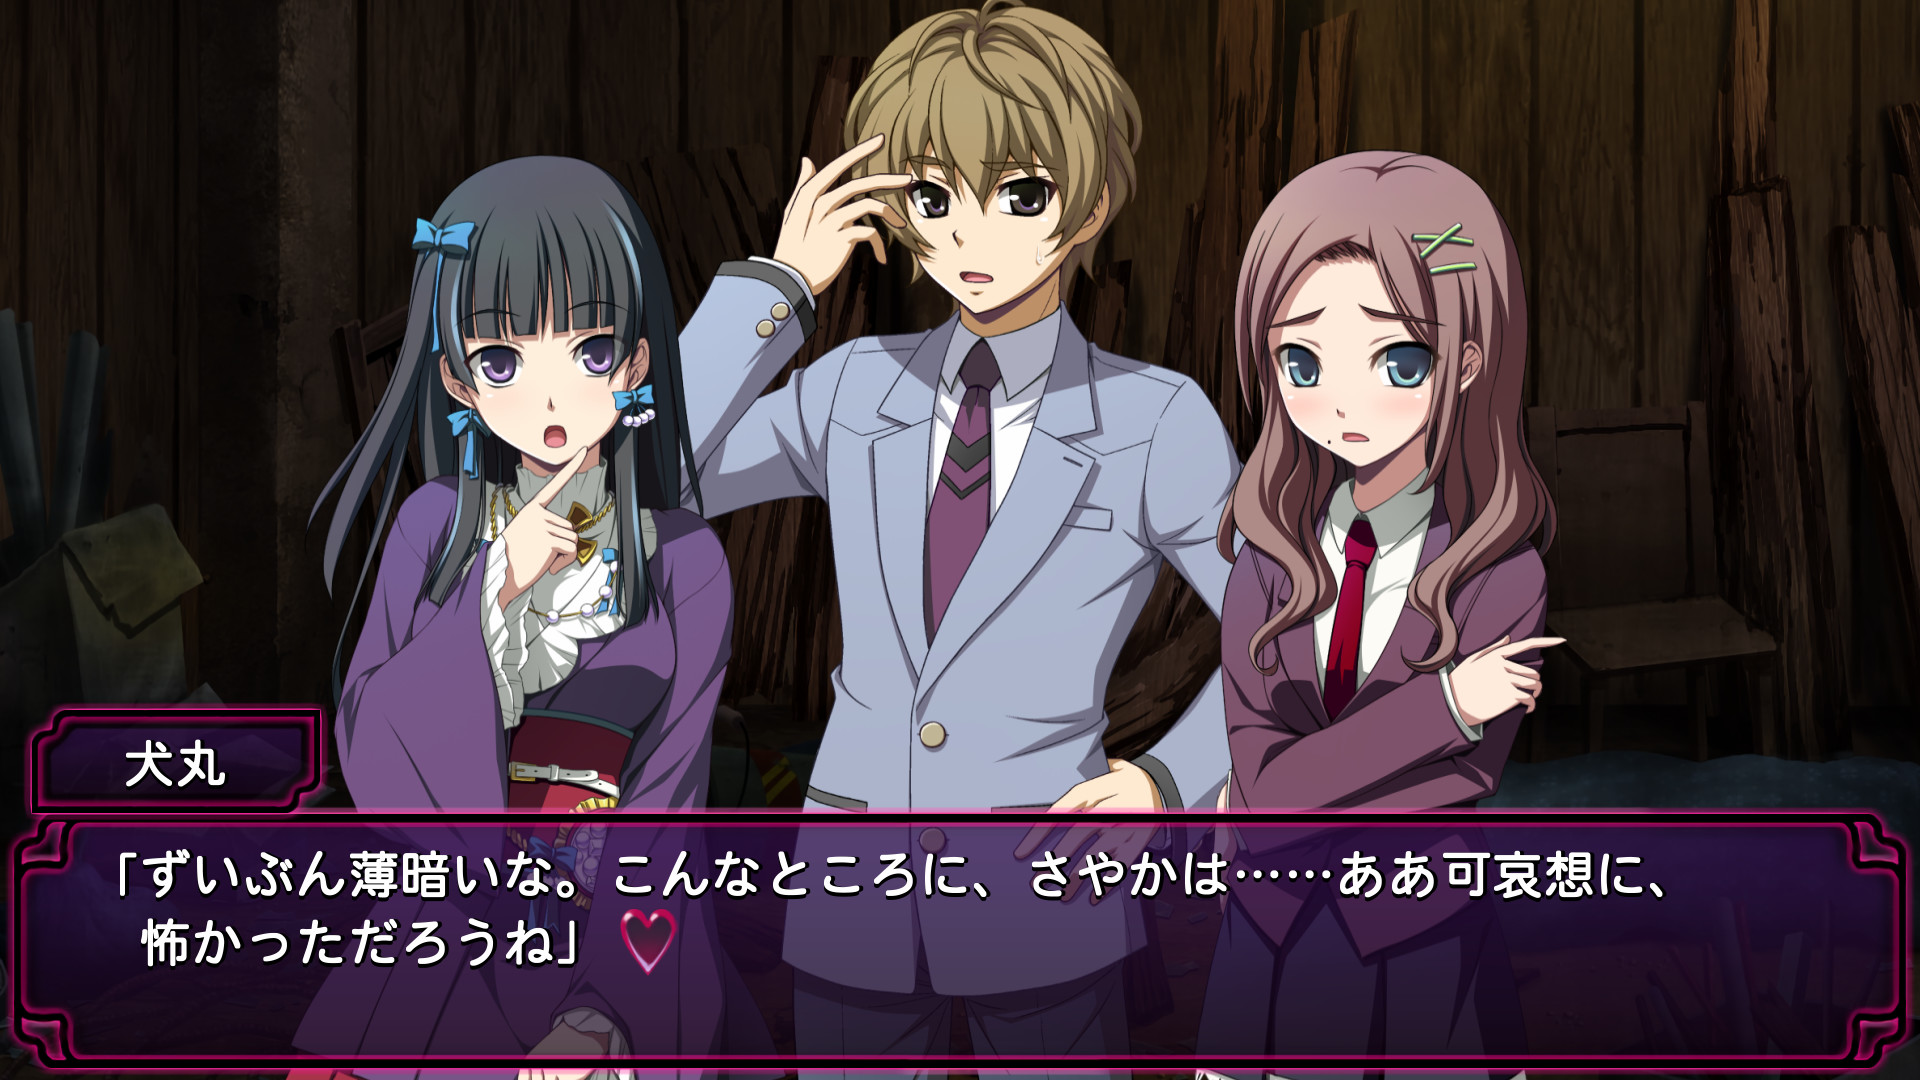 Steam Corpse Party Sweet Sachiko S Hysteric Birthday Bash